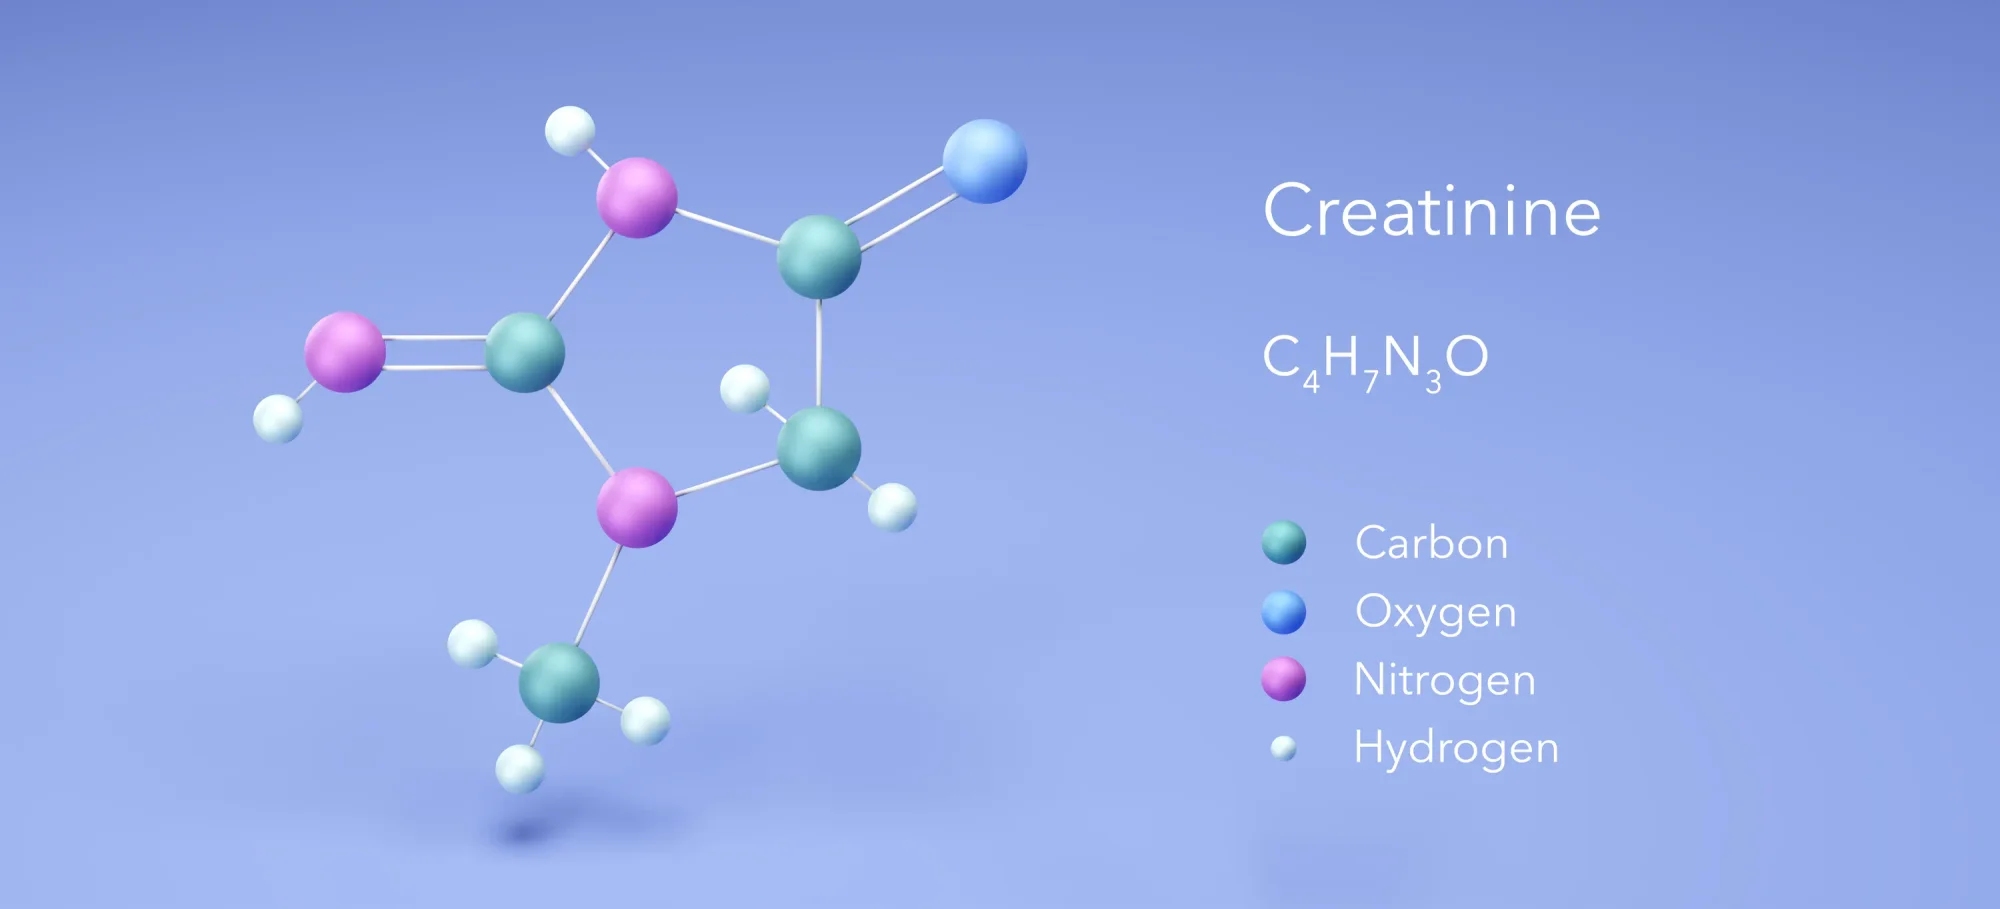 Creatinine. Molecular structures. 3D rendering. Structural Chemical Formula and Atoms with Color Coding.